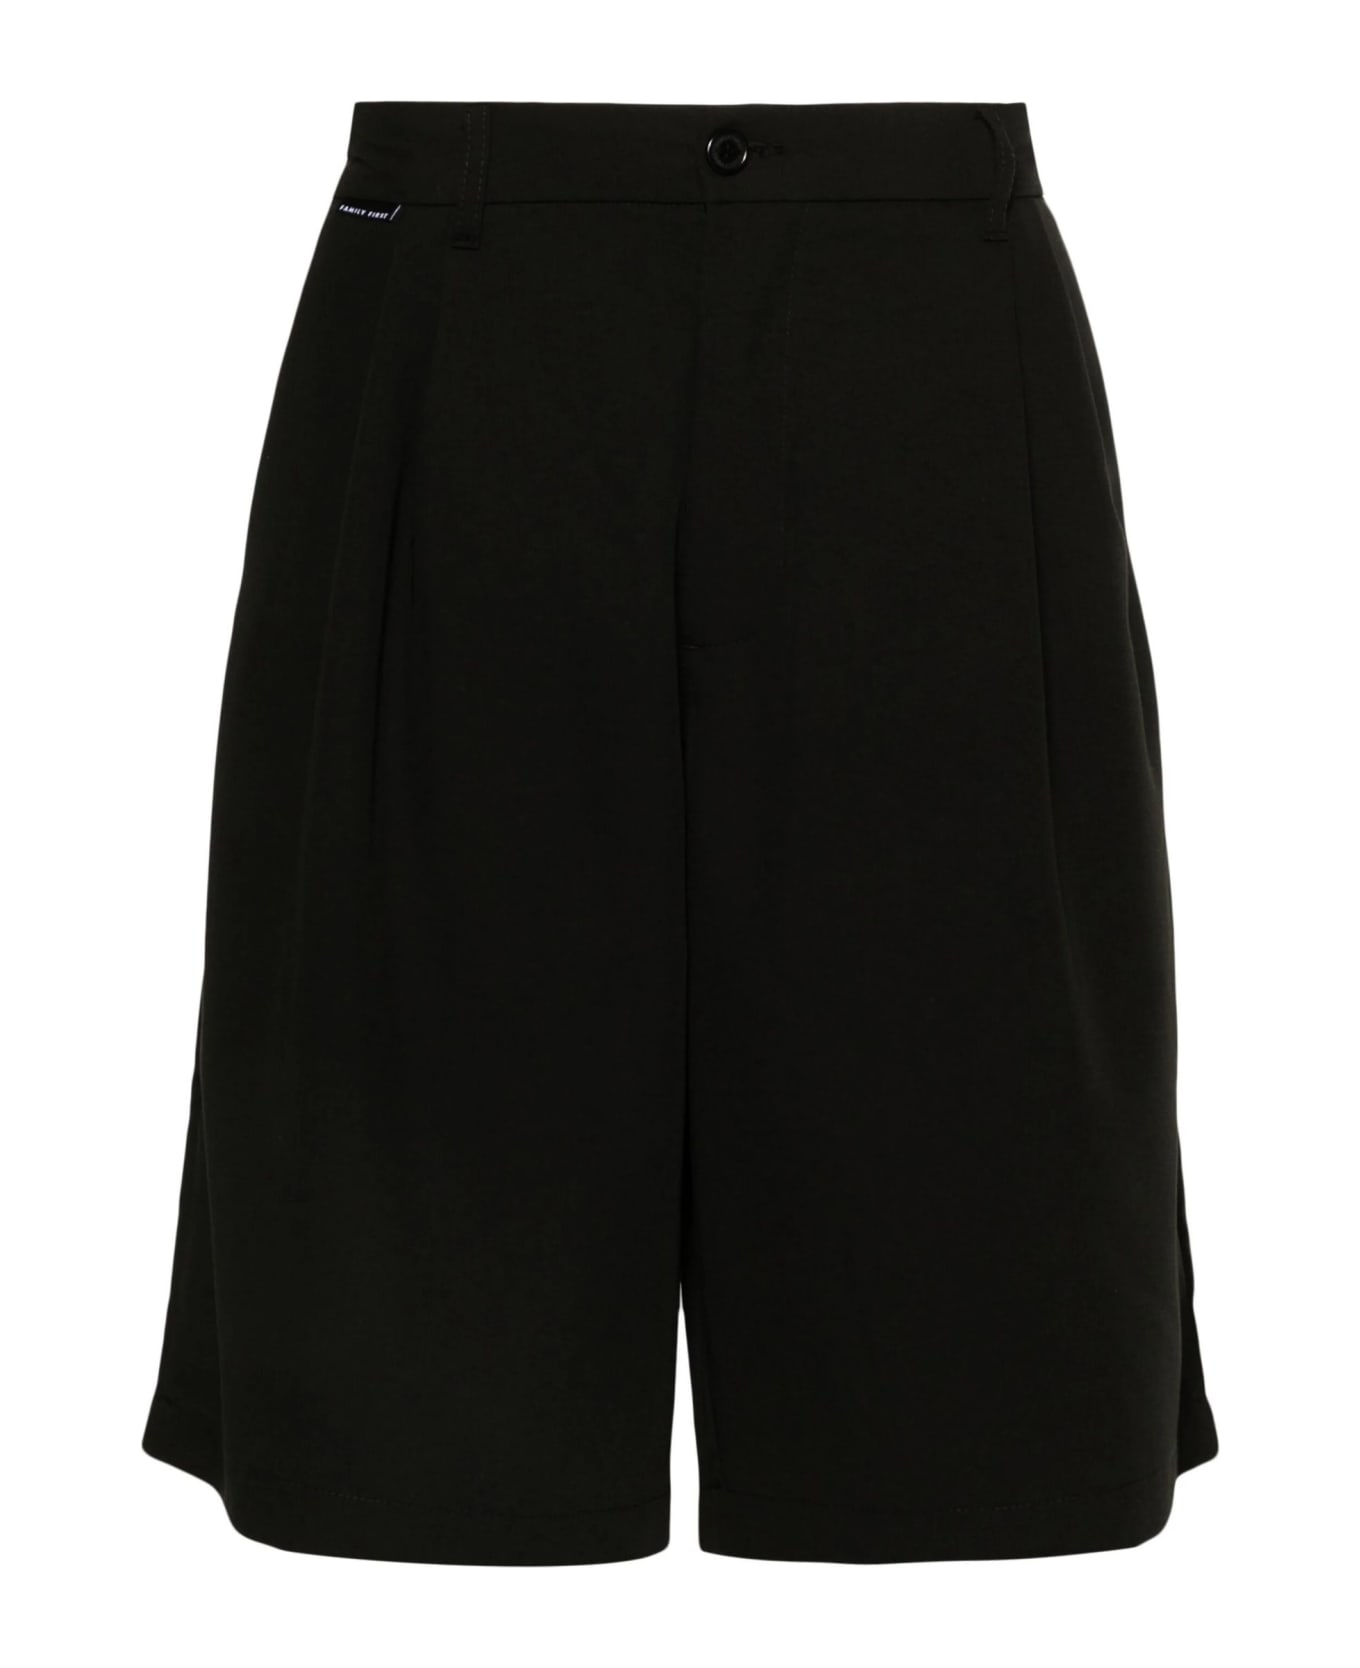 Family First Milano Black Tailored Knee Shorts - BLACK